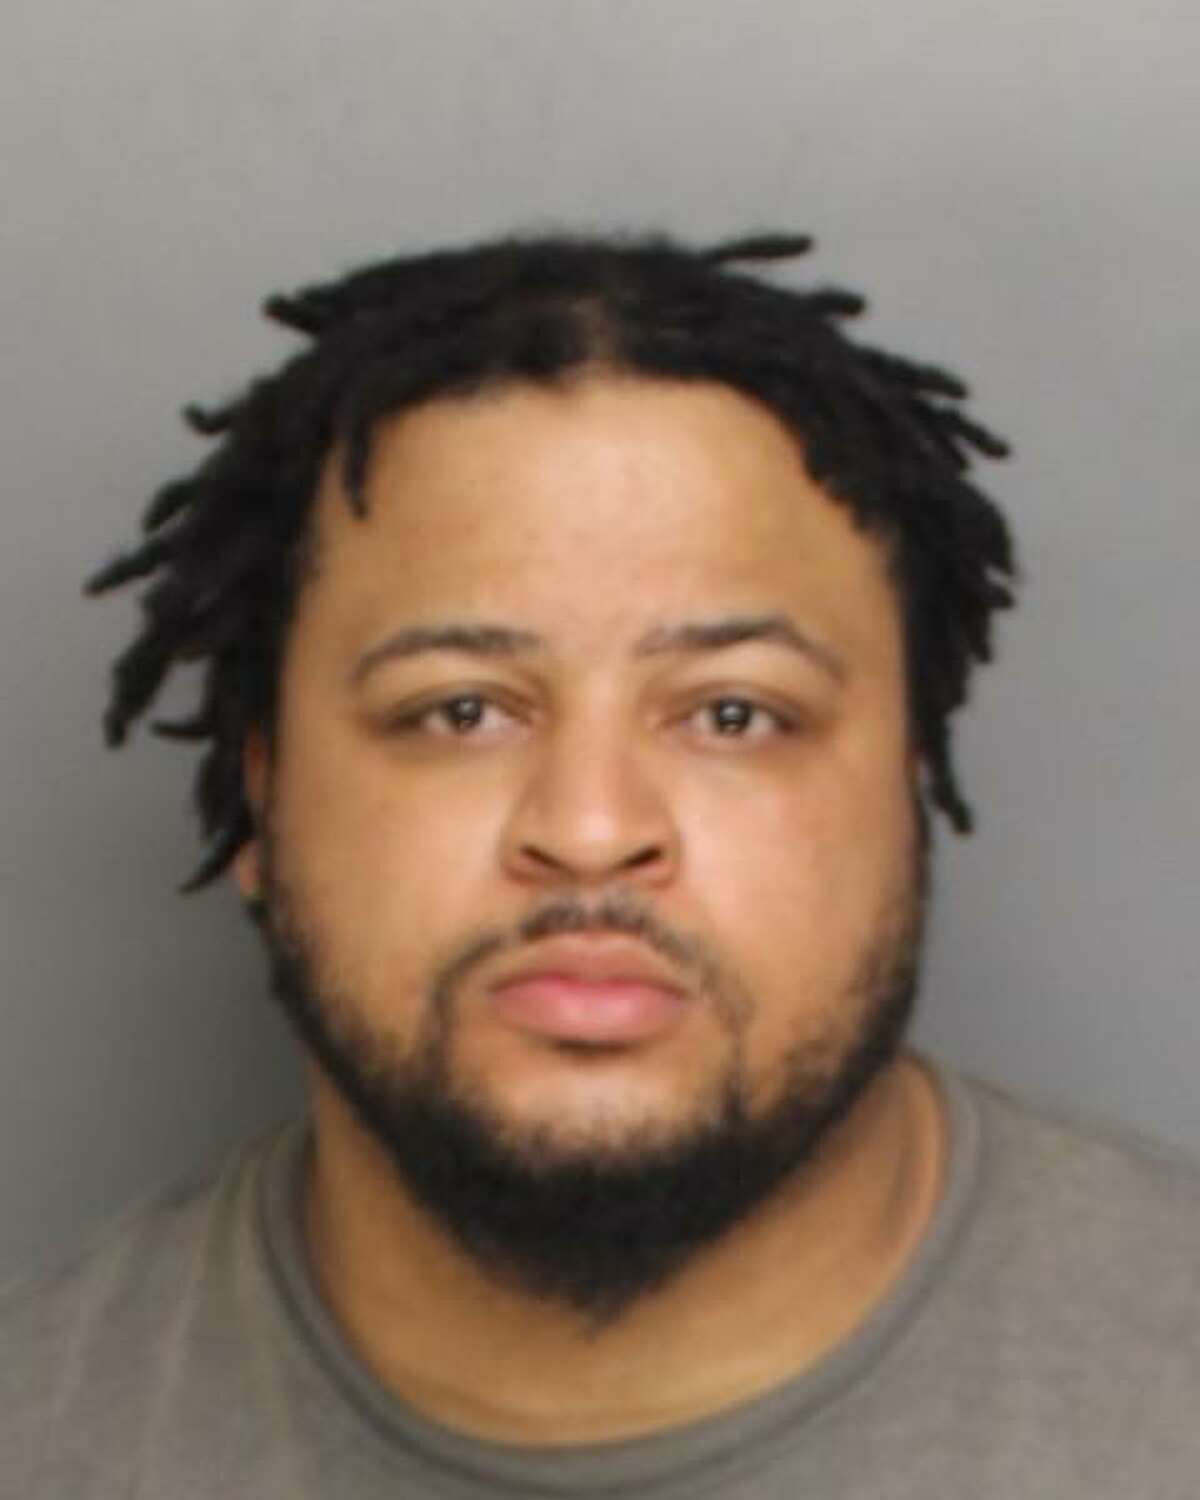 Police charged Jaquan Bryant, 32, of Waterbury with the fatal shooting of Raheem Lynch, 24, of Bridgeport. The shooting took place Nov. 6.